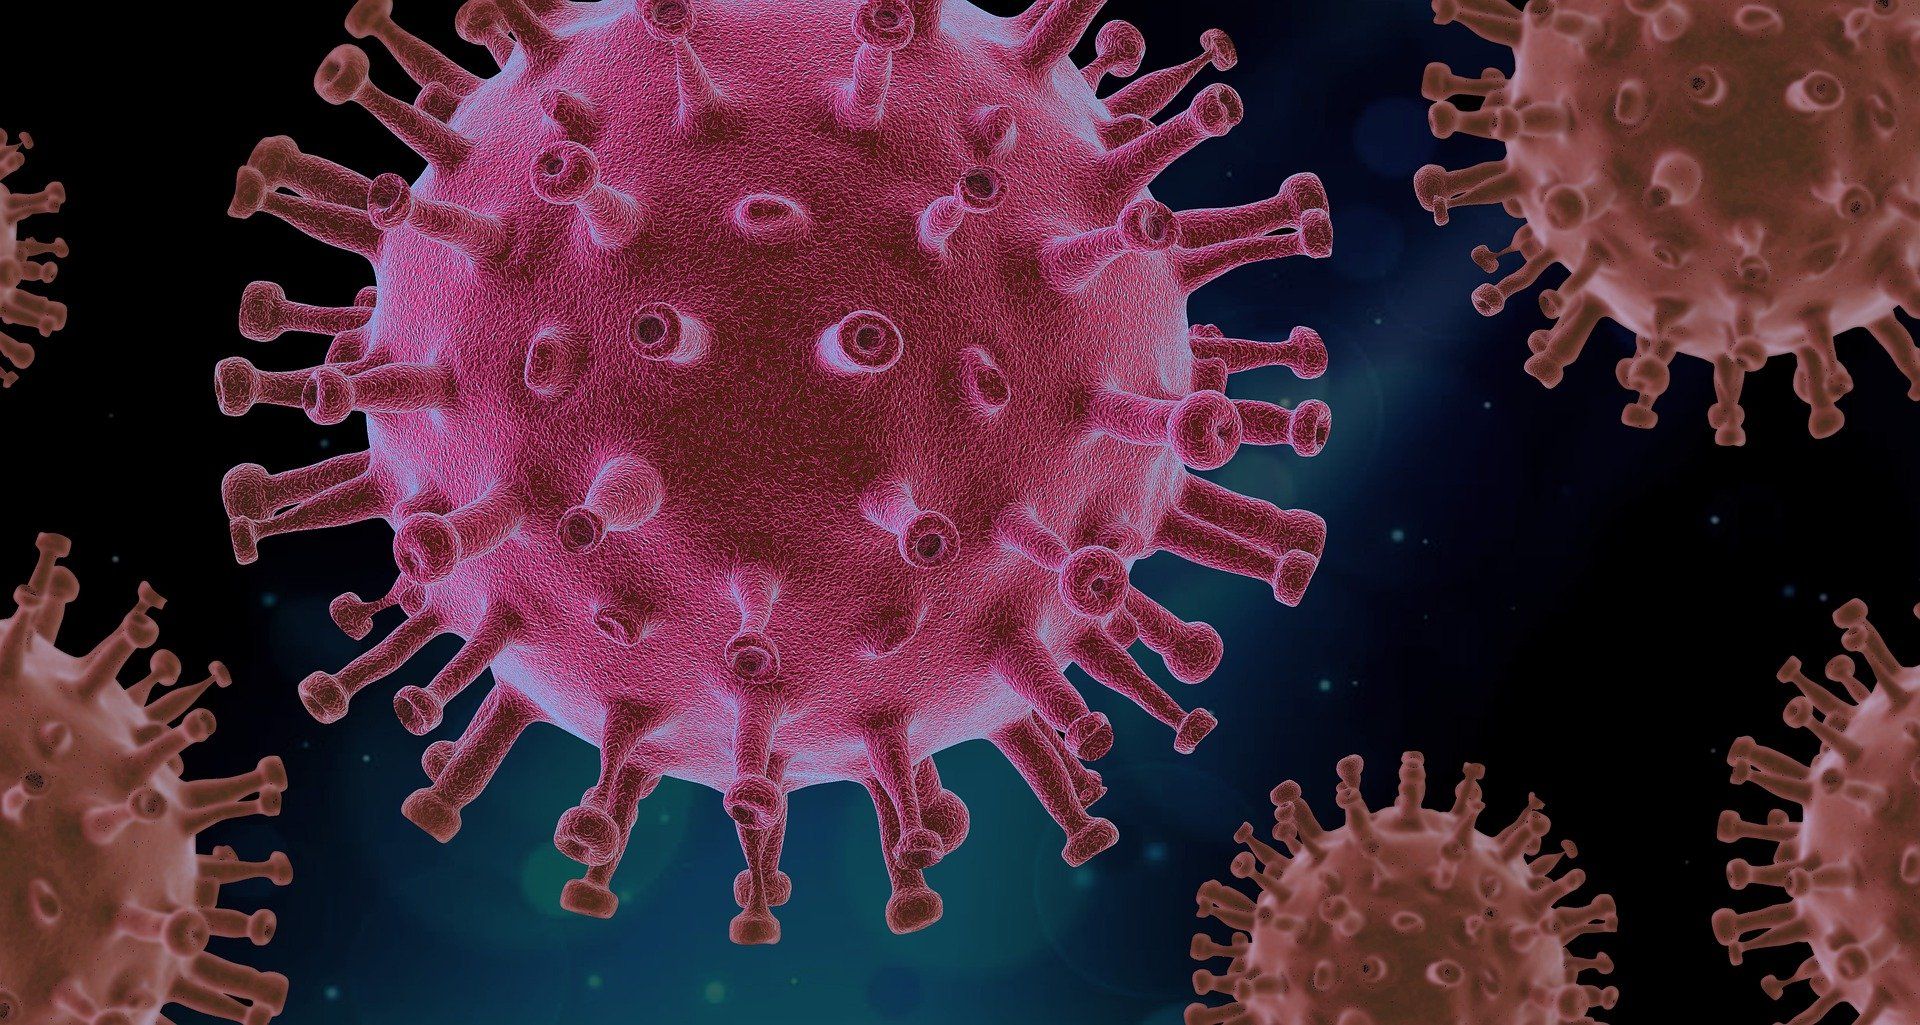 New UK coronavirus strain has spread to 50 countries, South African variant found in 20 nations: WHO